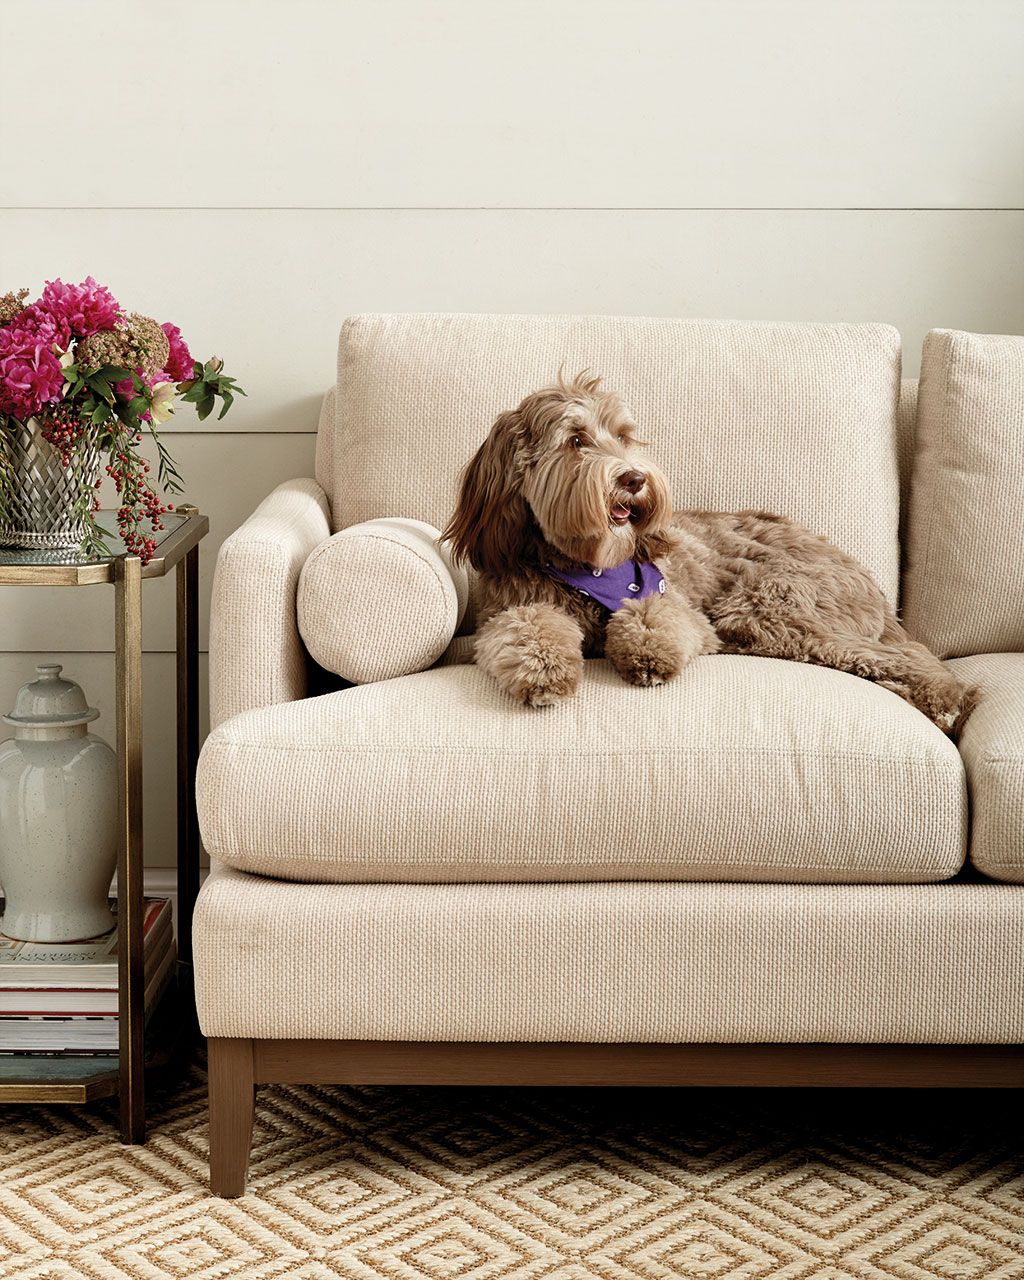 What is the best material for a couch if you have a dog?